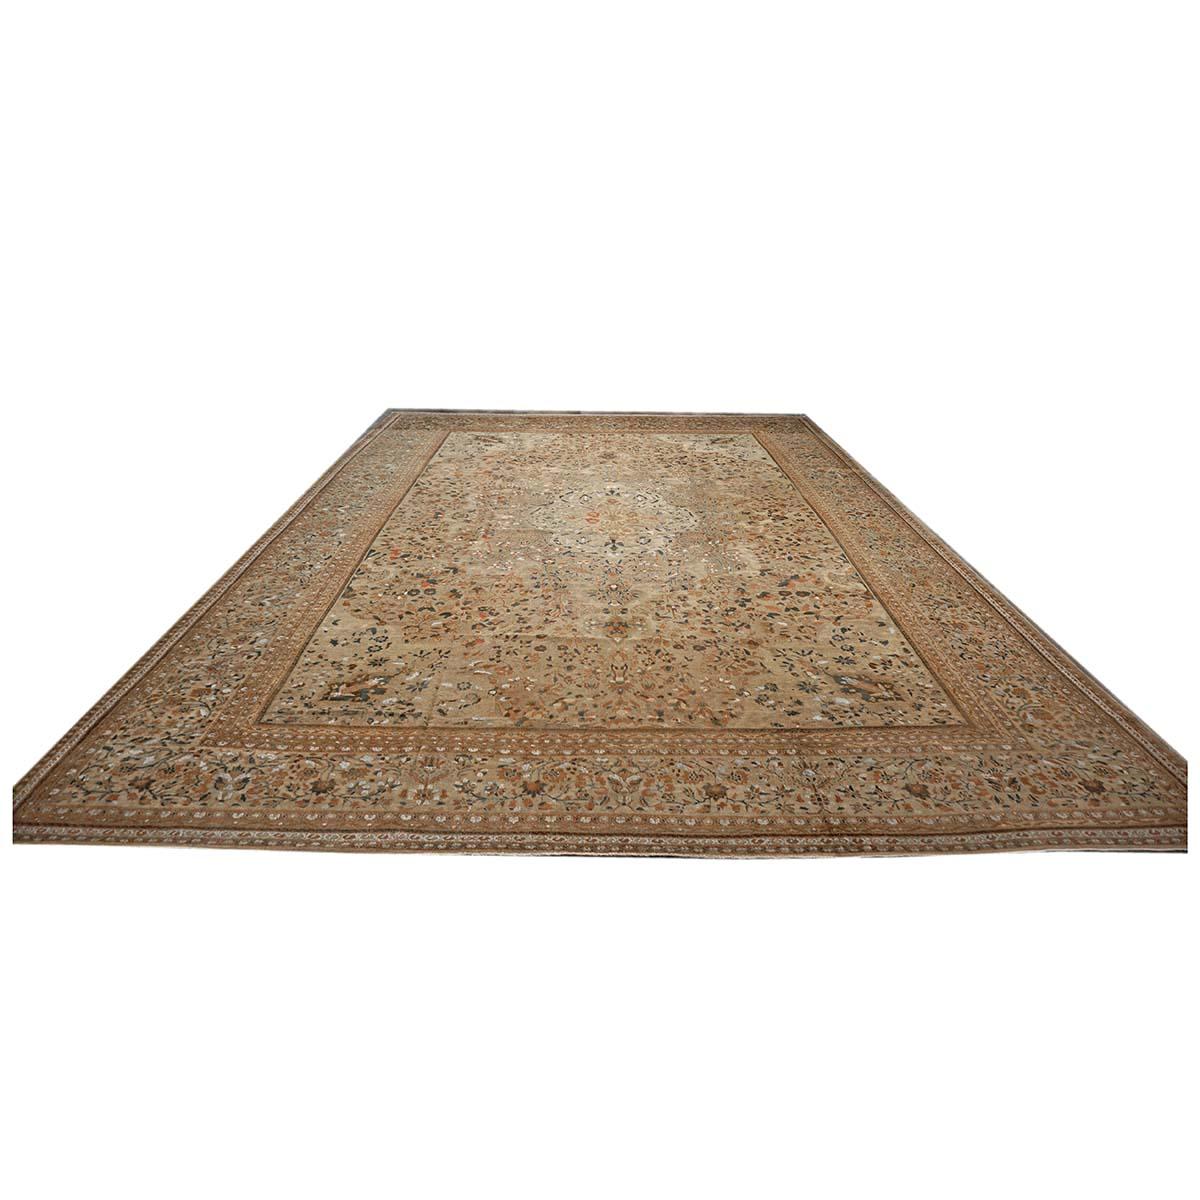 We present a beautiful wool & silk tan background, large scale, Medallion Design Antique Persian Ziegler Sultanabad Rug #9902456. Ziegler Sultanabad carpets are classics in the world of interior design, and they continue to be used in many new and